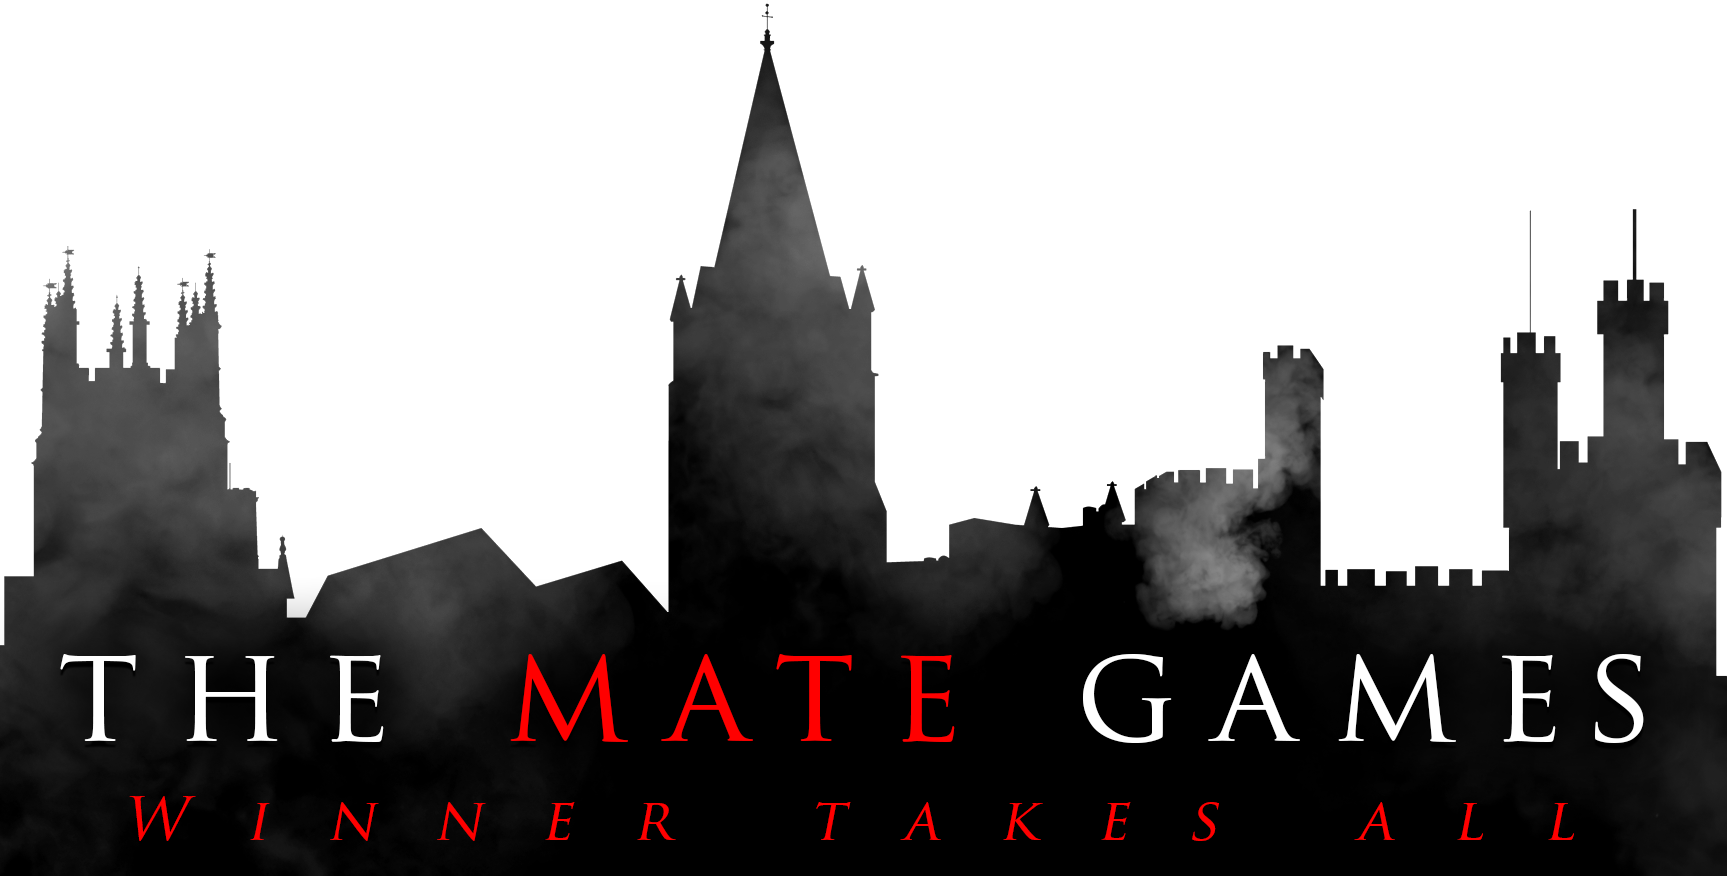 The Mate Games